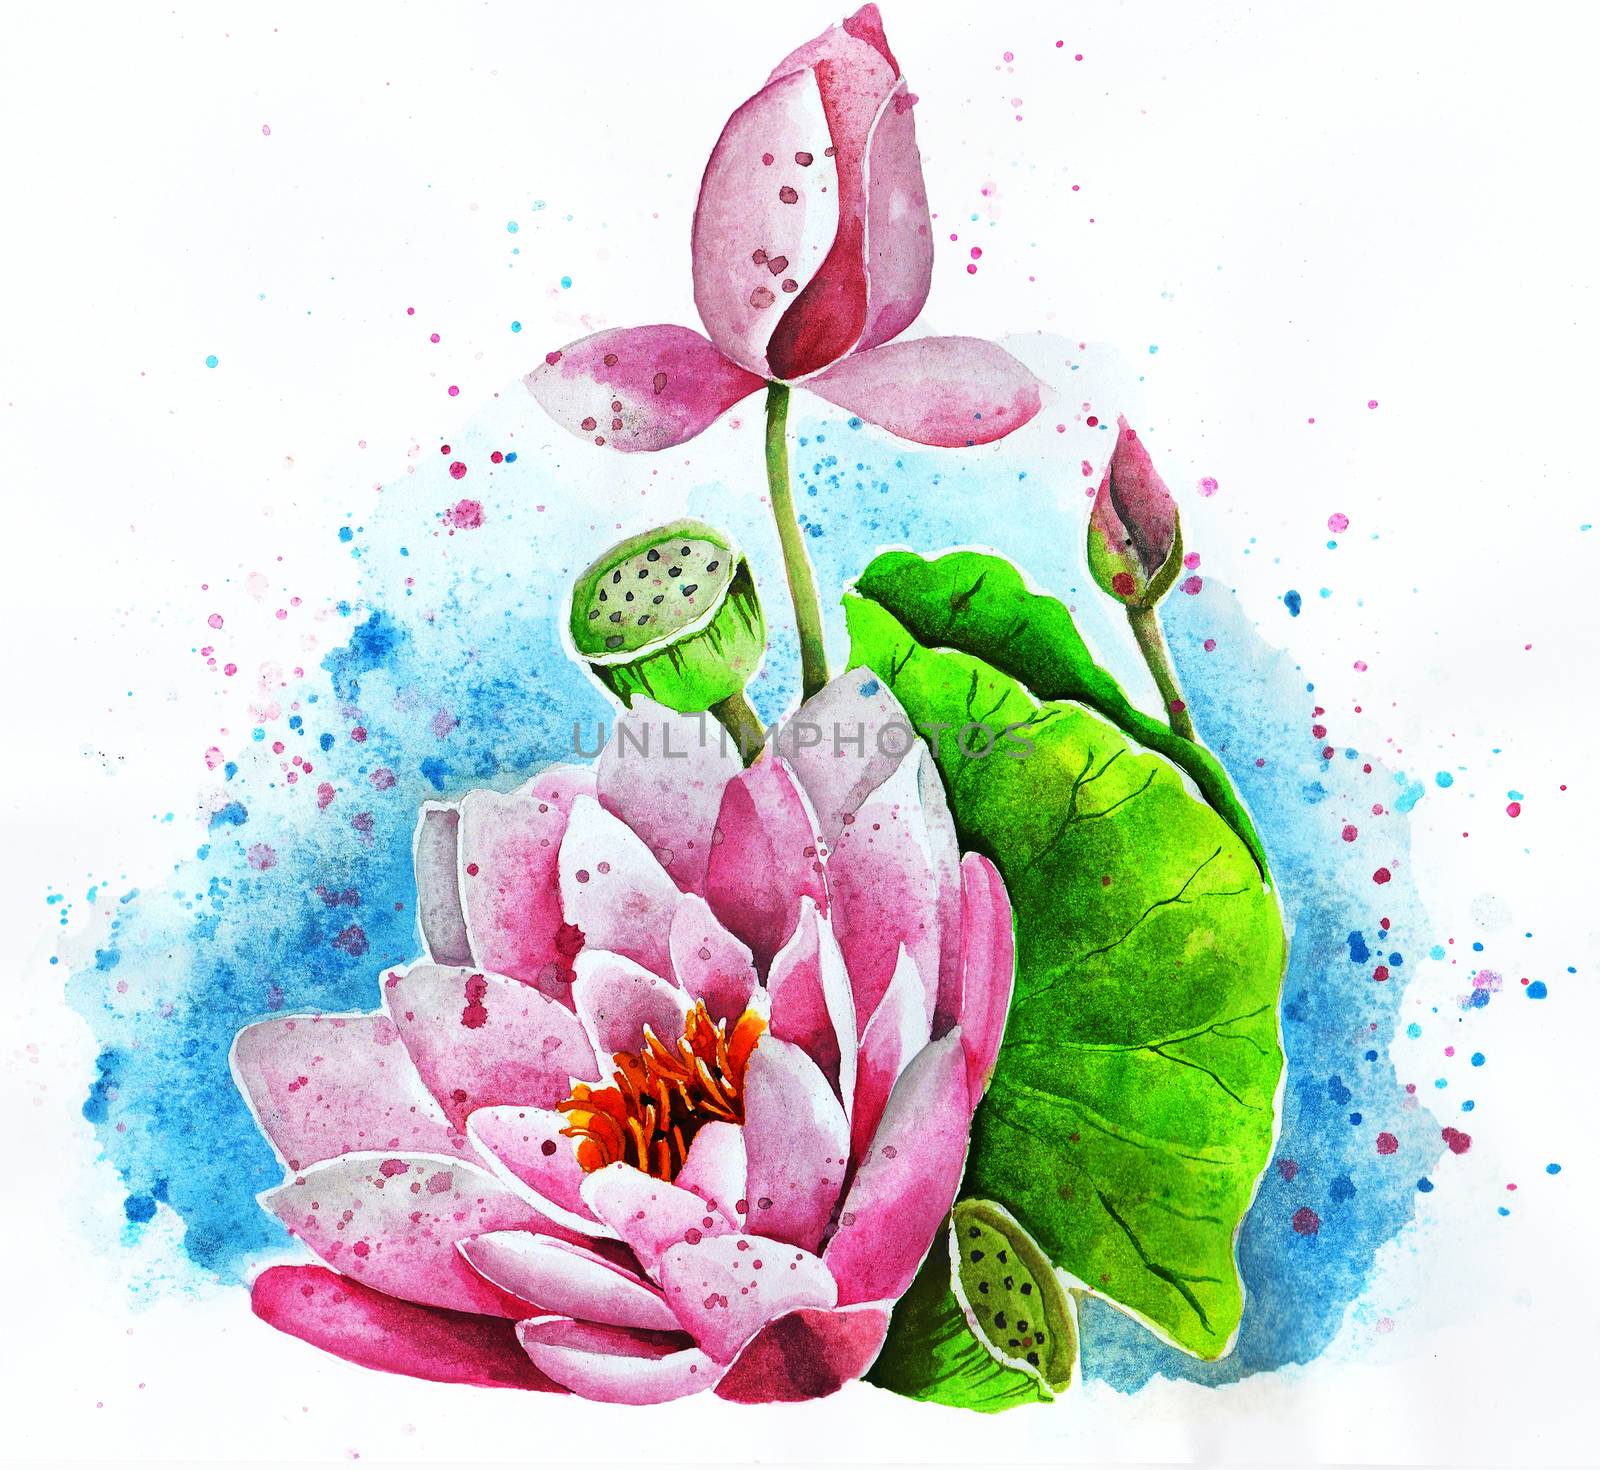 Lotus flower on a white background watercolor drawing by devy